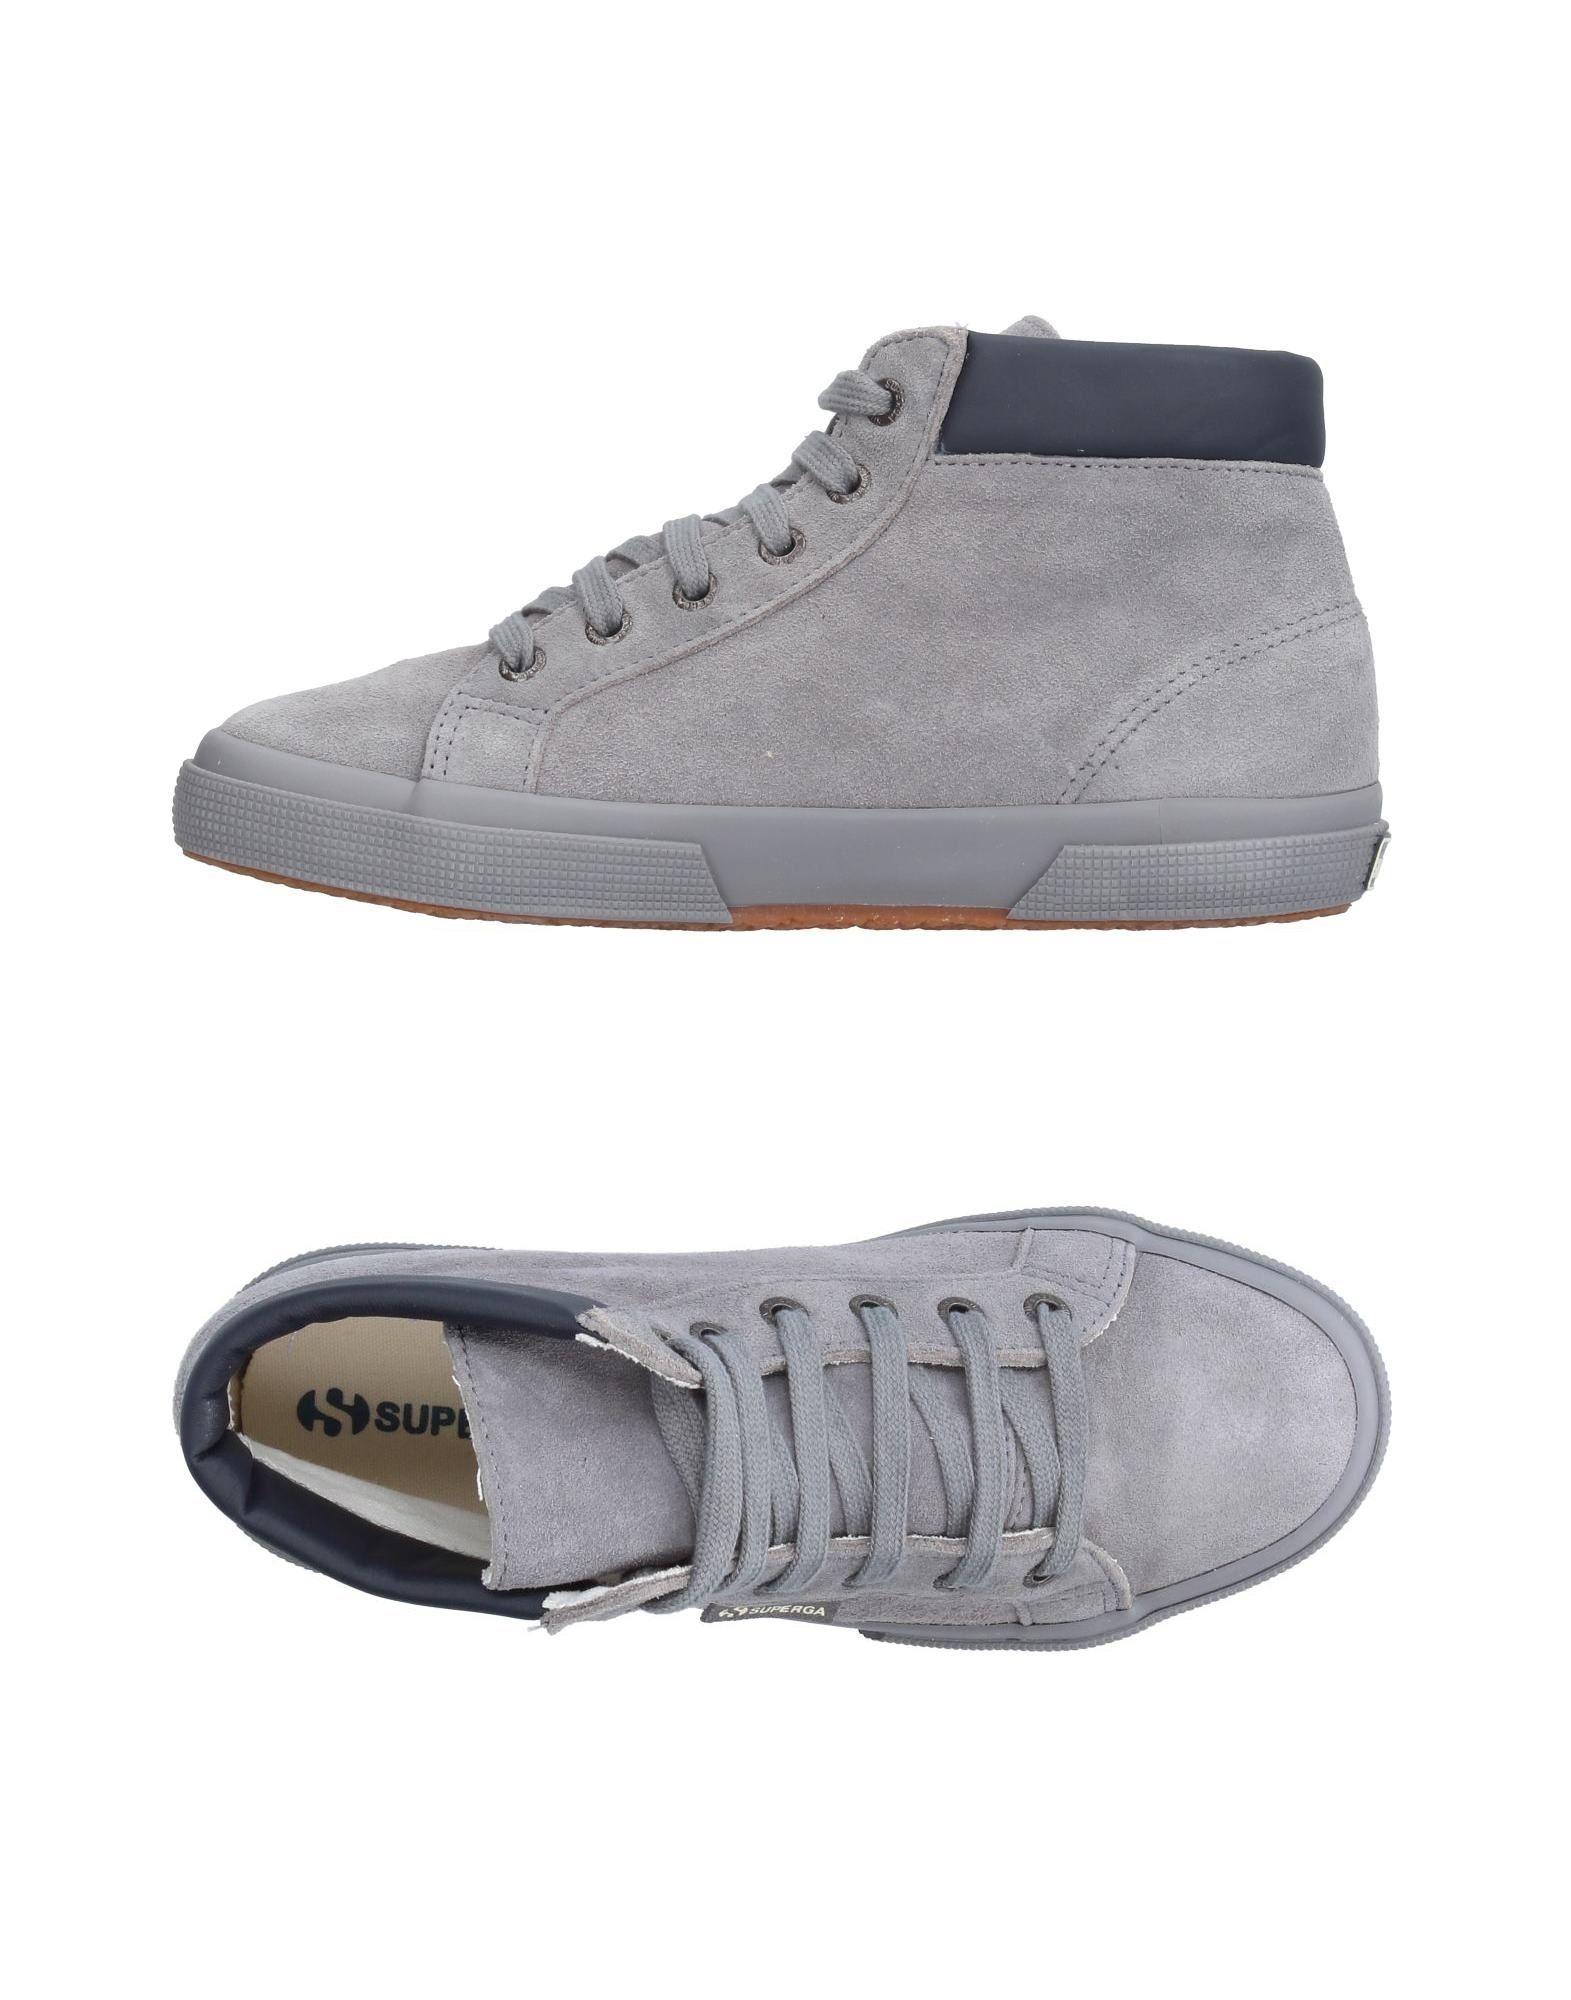 Lyst - Superga High-tops & Sneakers in Gray